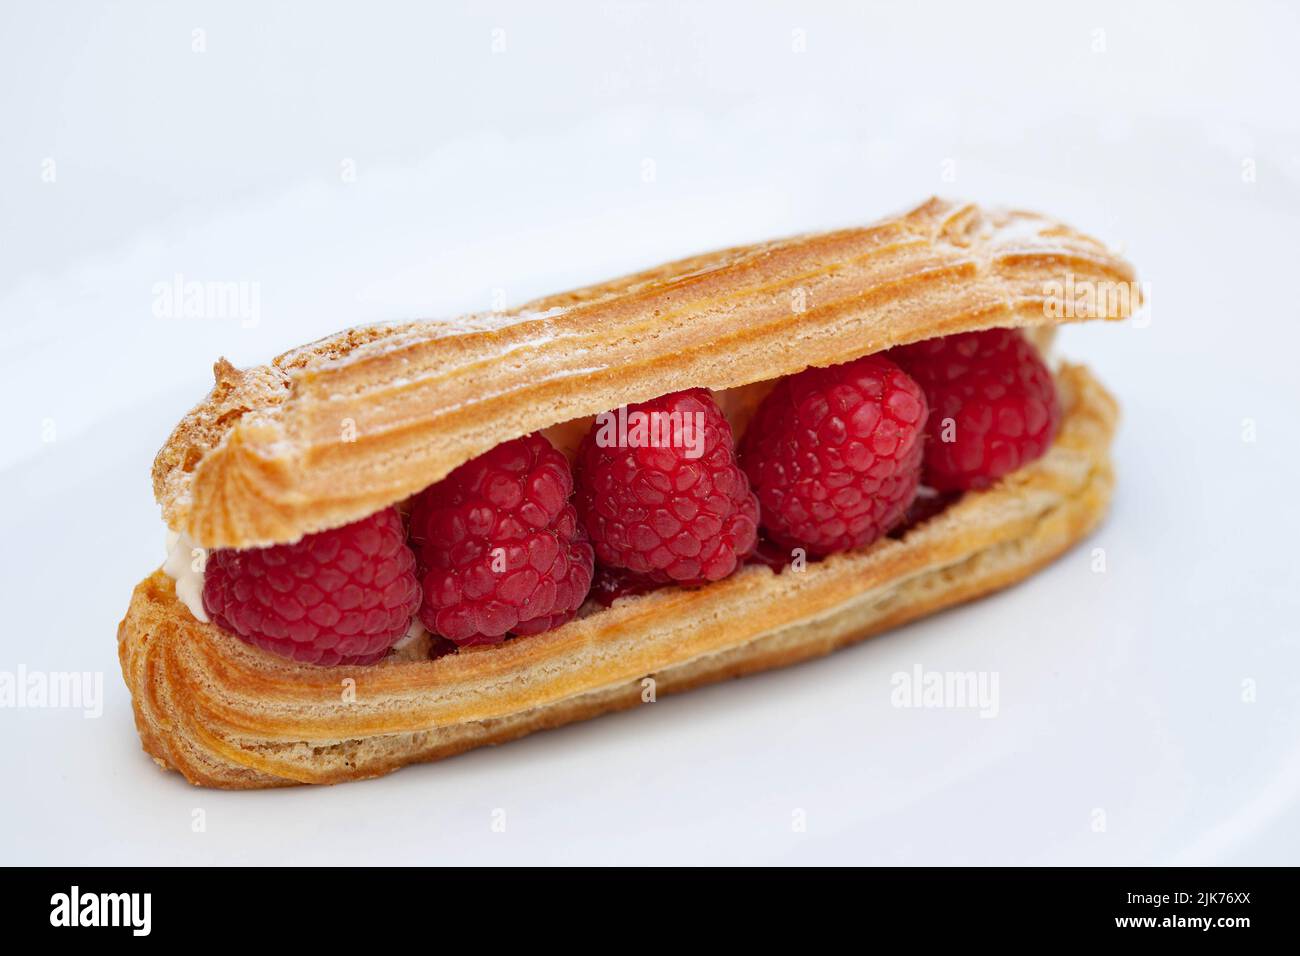 Close up of a French pastry Stock Photo